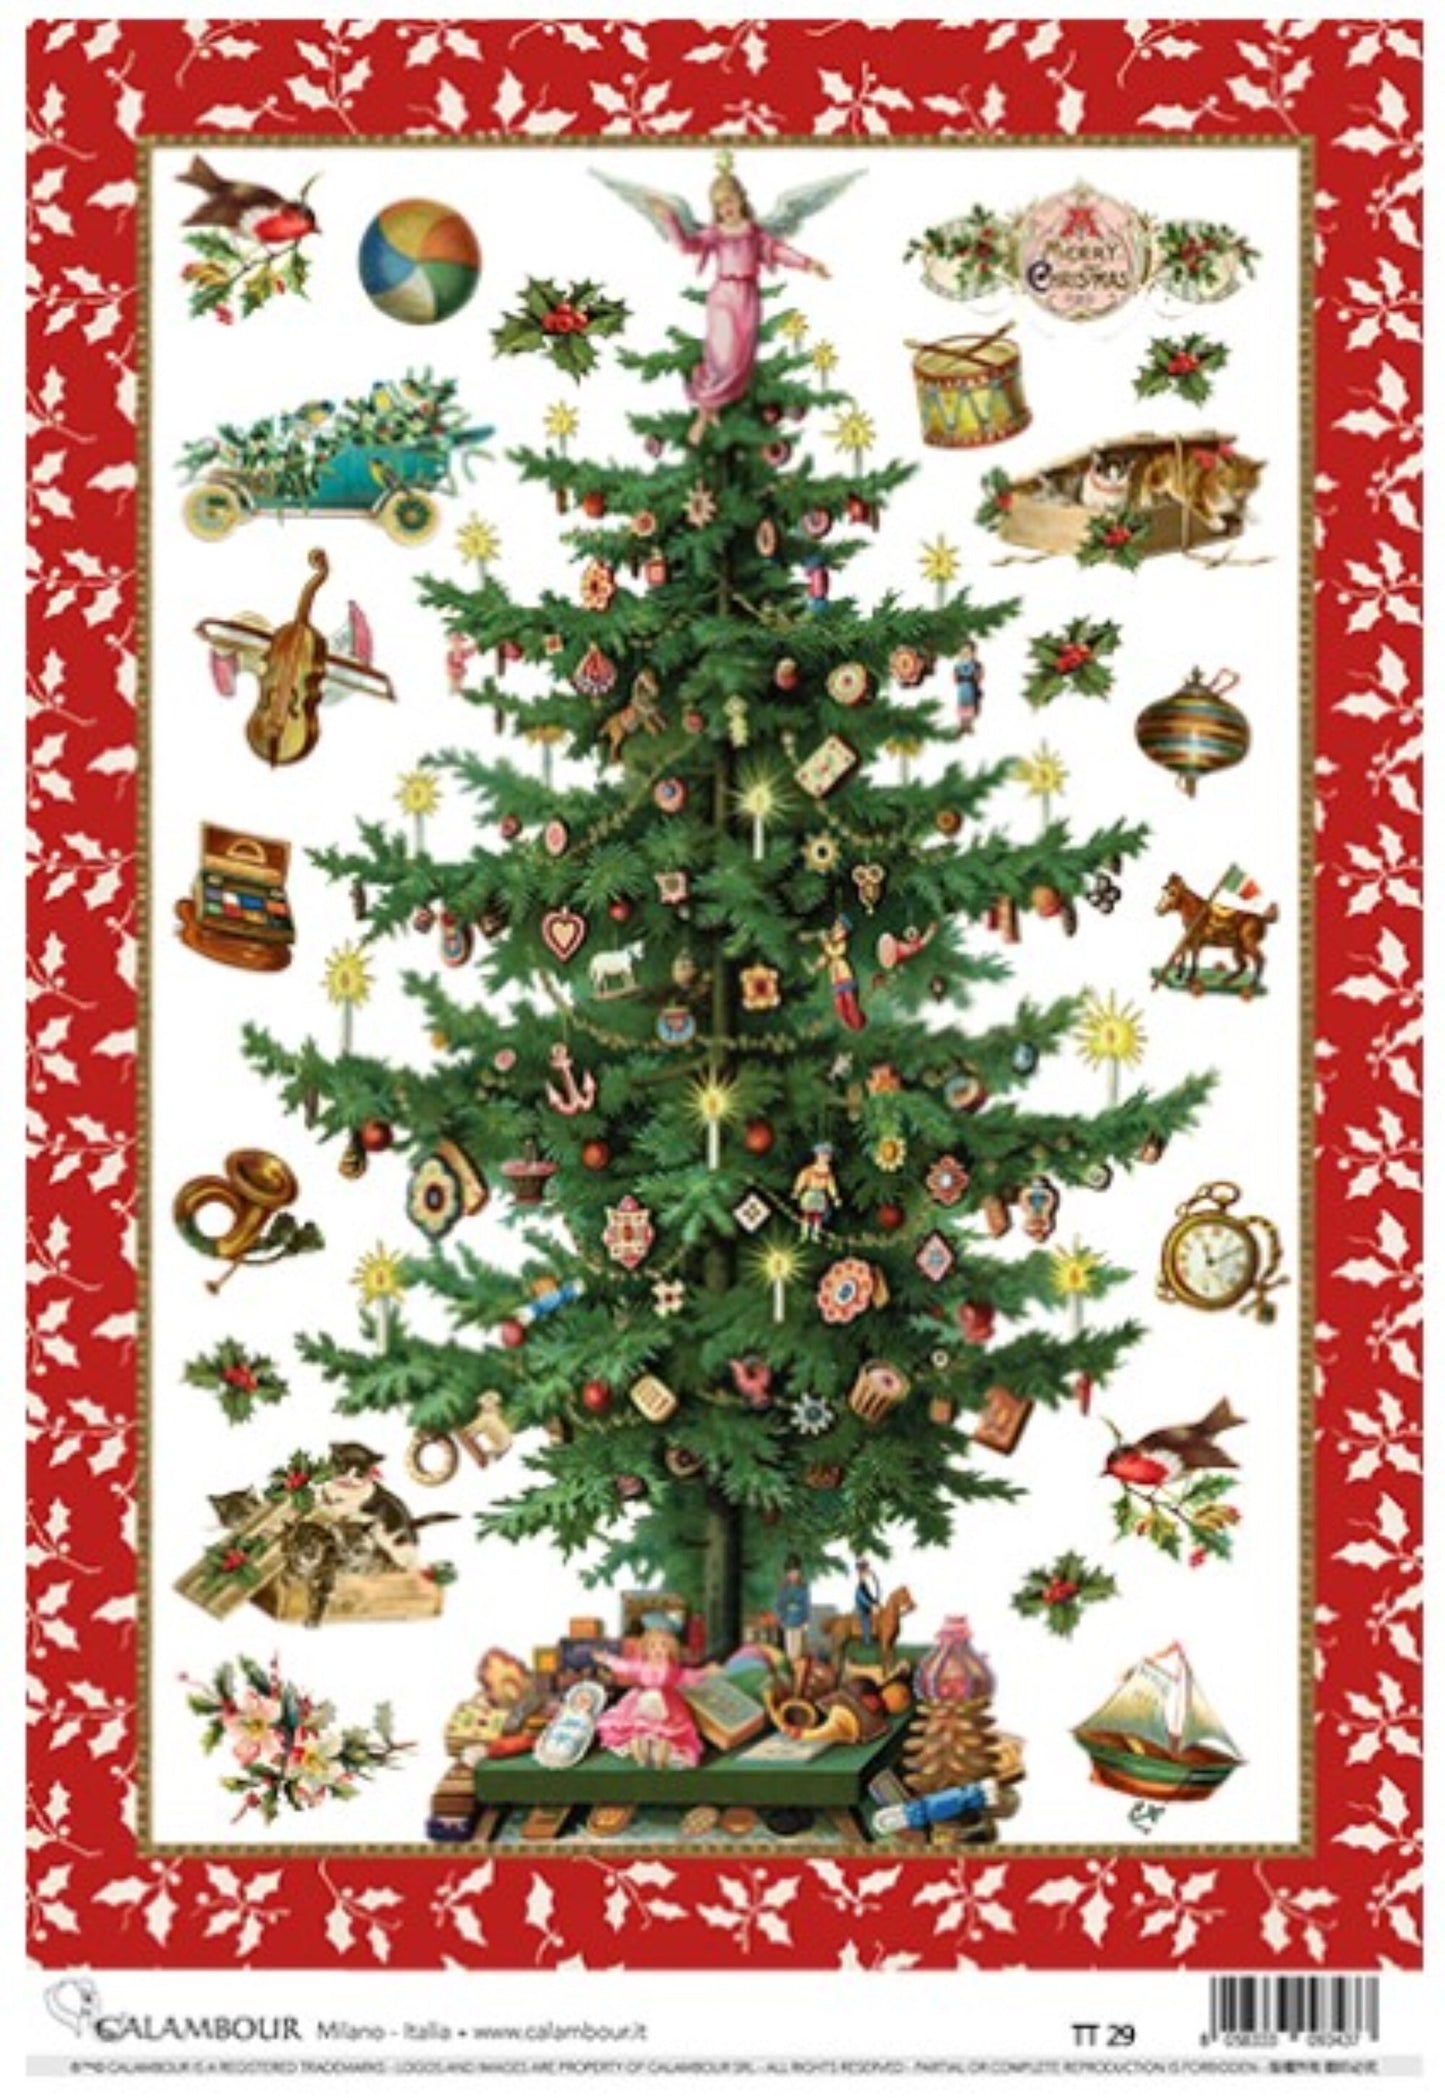 Calambour, Italian Design, Christmas Collection, Tree, Music, Garland, Holly, Mulberry Rice Paper, TT29, Decoupage, 22 x 32cm 8.75 x 12.5 A4